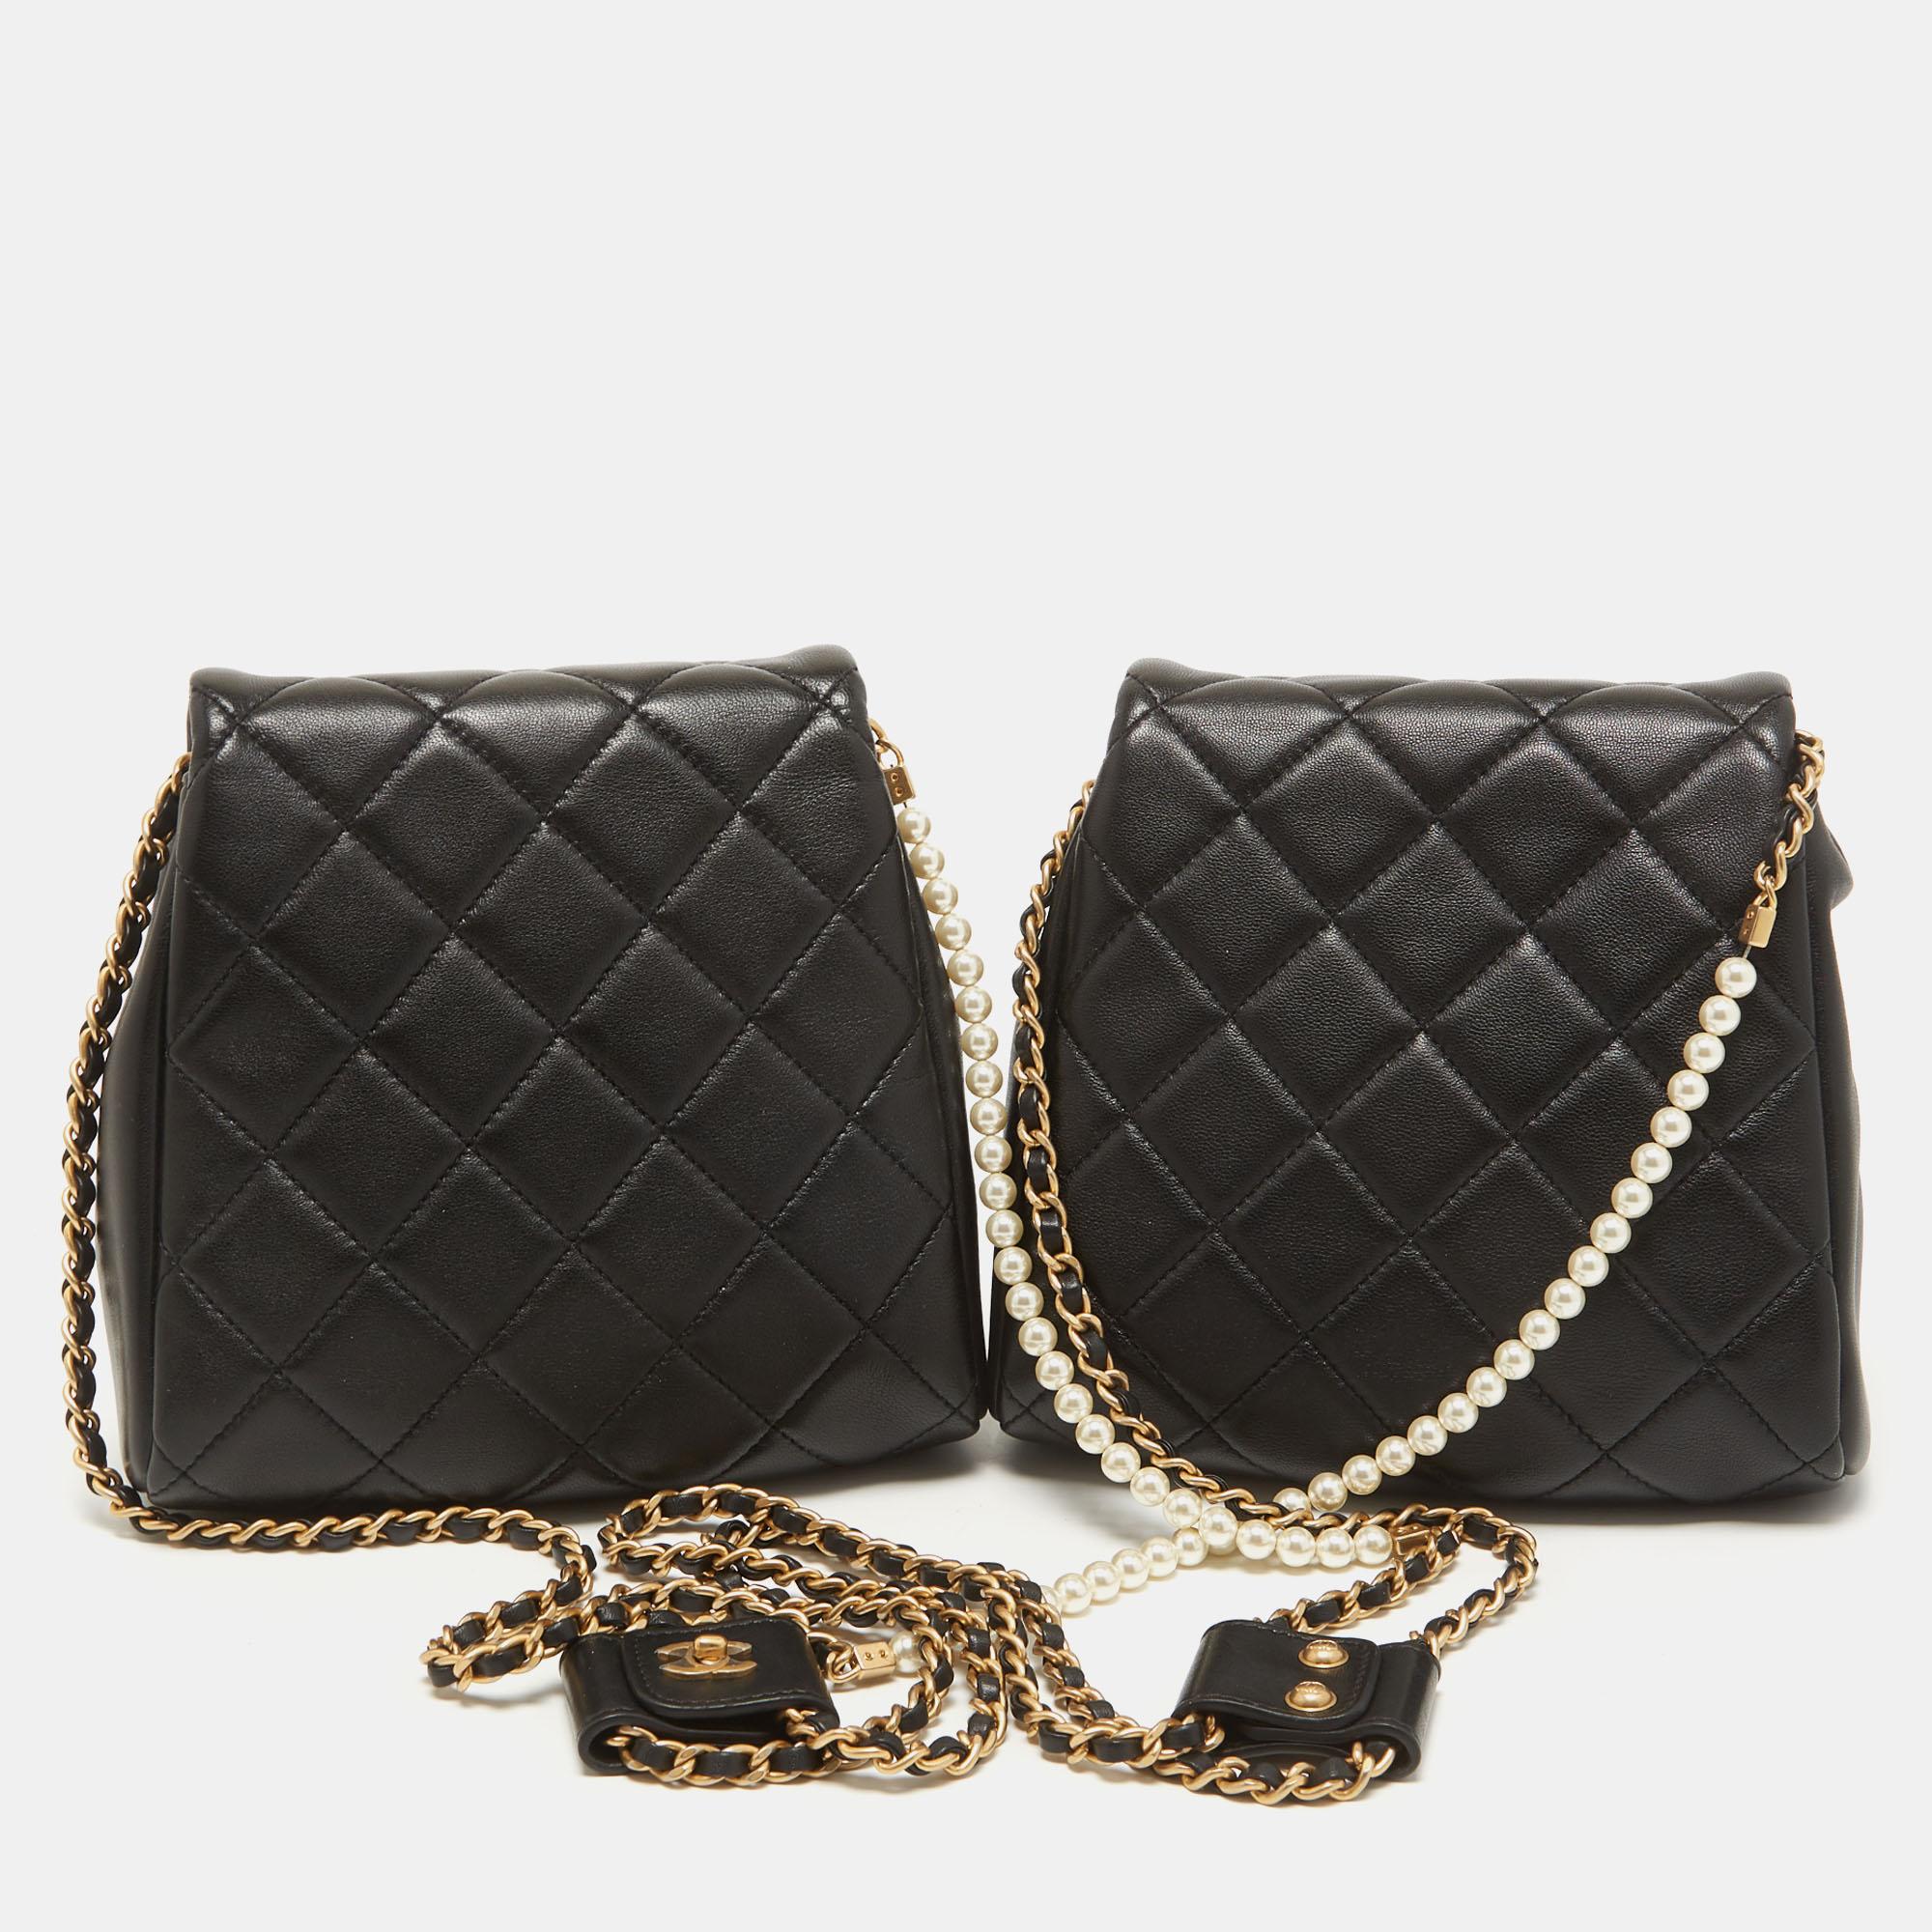 Another revolutionary style from the house of Chanel, the Side-Packs were first introduced in the brand's Spring-Summer 2019 collection. It comes as a pair of two small flap bags suspended from the signature interweaved straps that are designed to